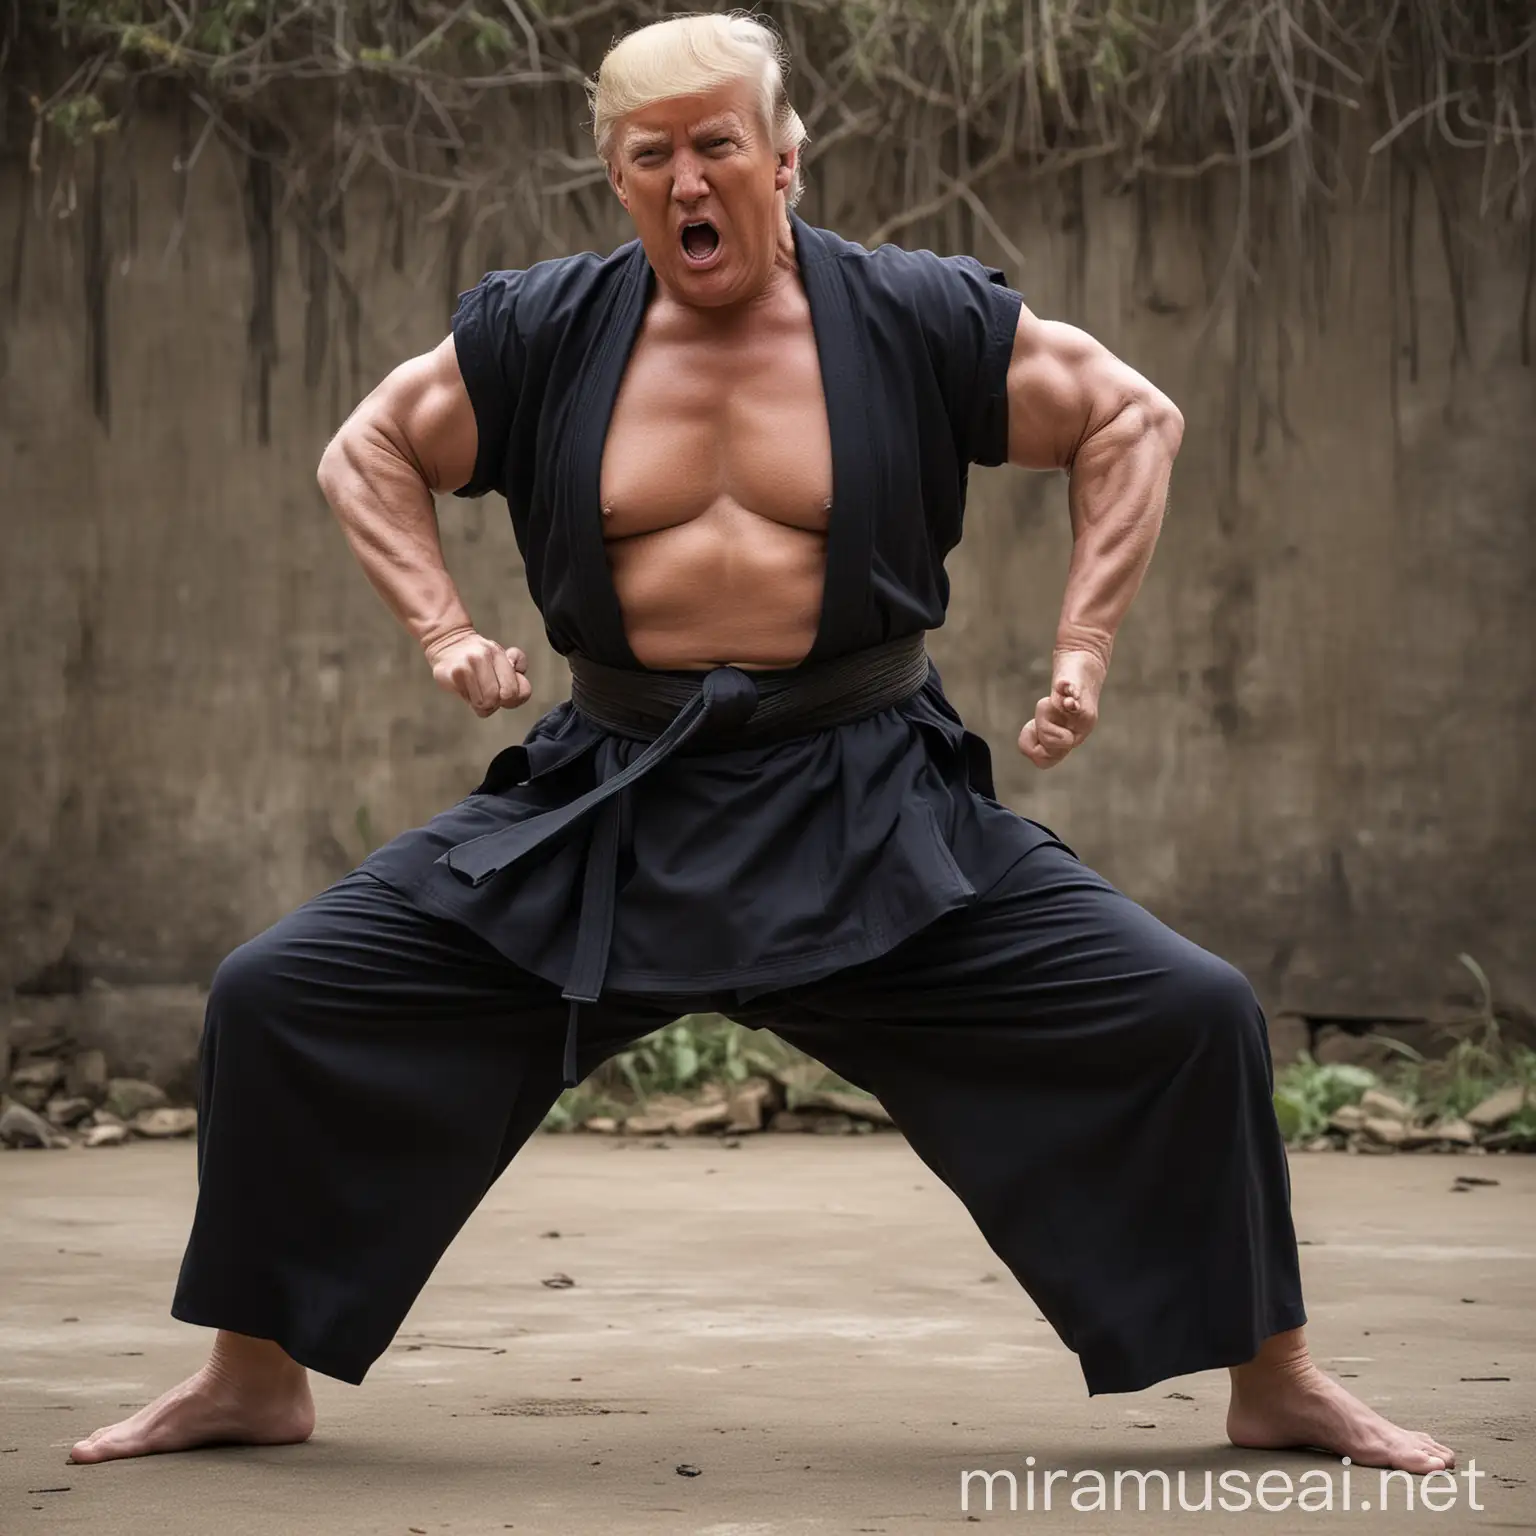 Donald Trump very muscular on a kungfu pose